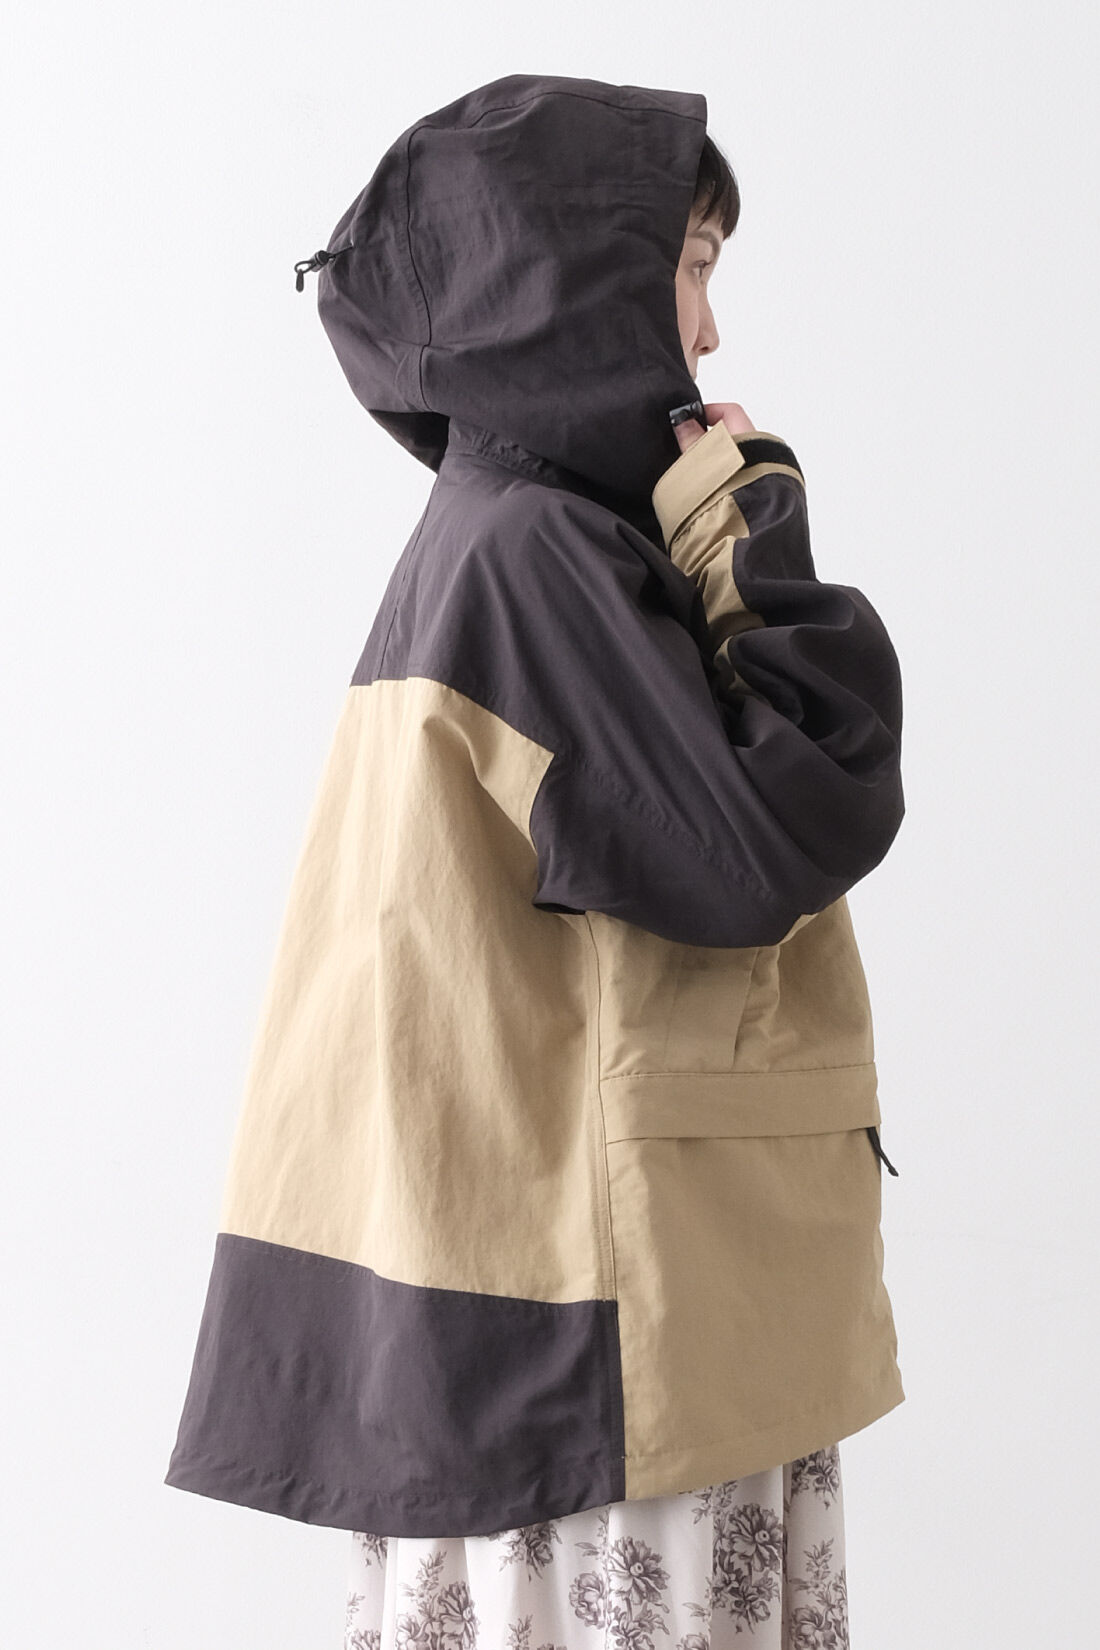 Real Stock|MEDE19F 〈SELECT〉 GERRY MOUNTAIN PARKA